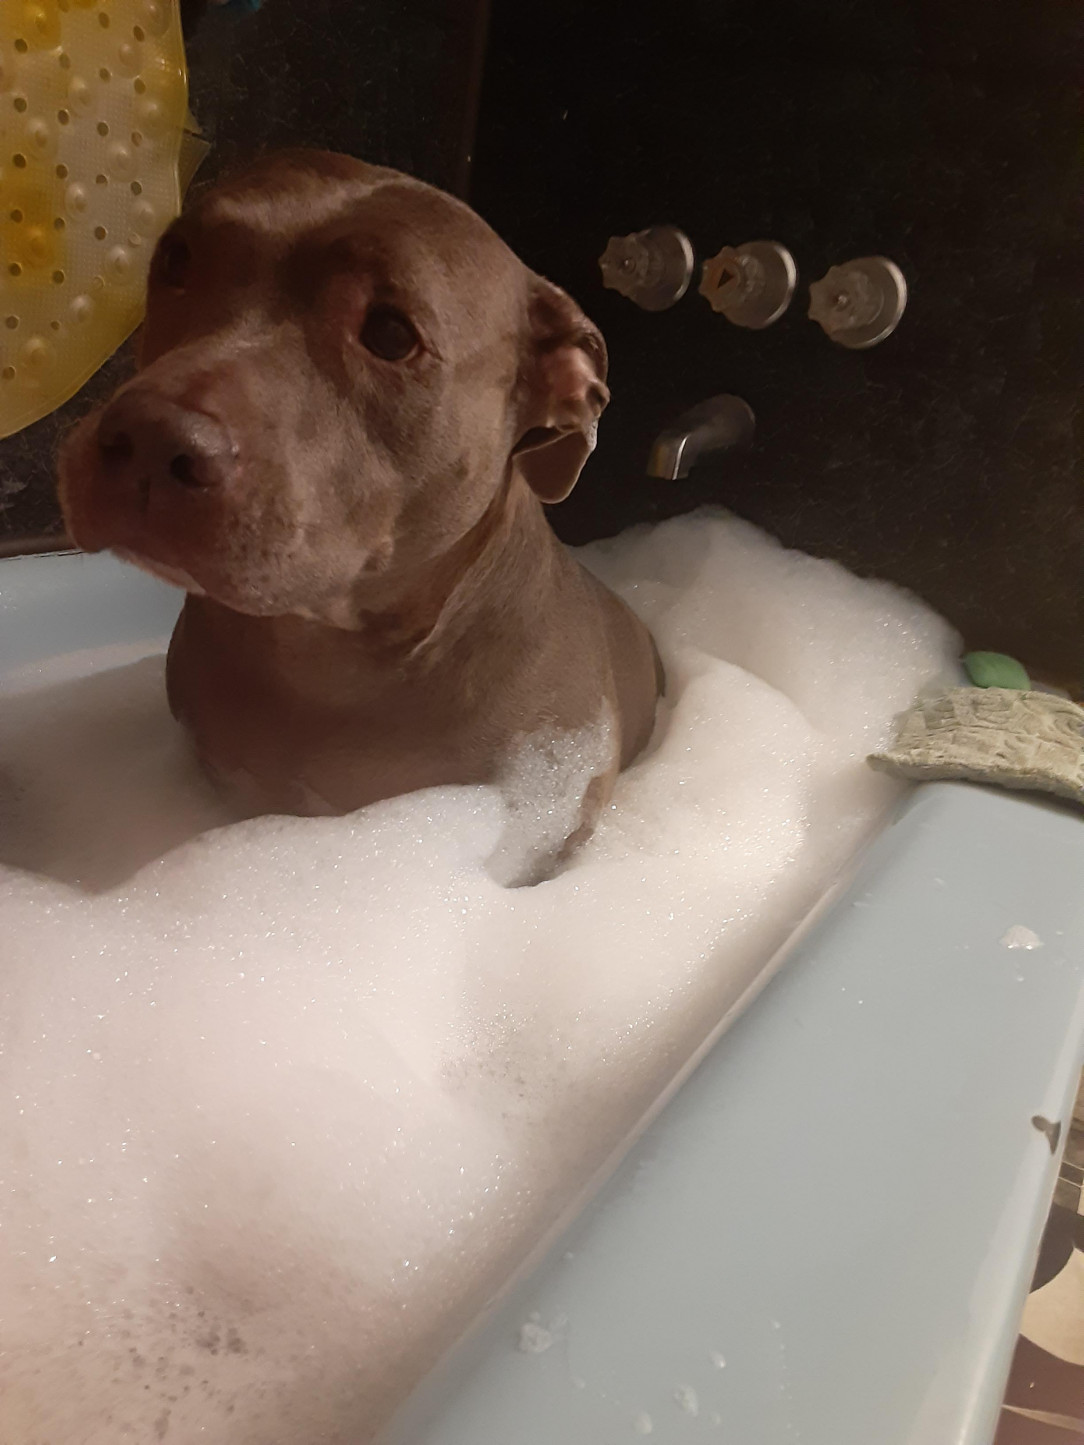 Does anyone else&#039;s dog like joining you in the tub? 🐕